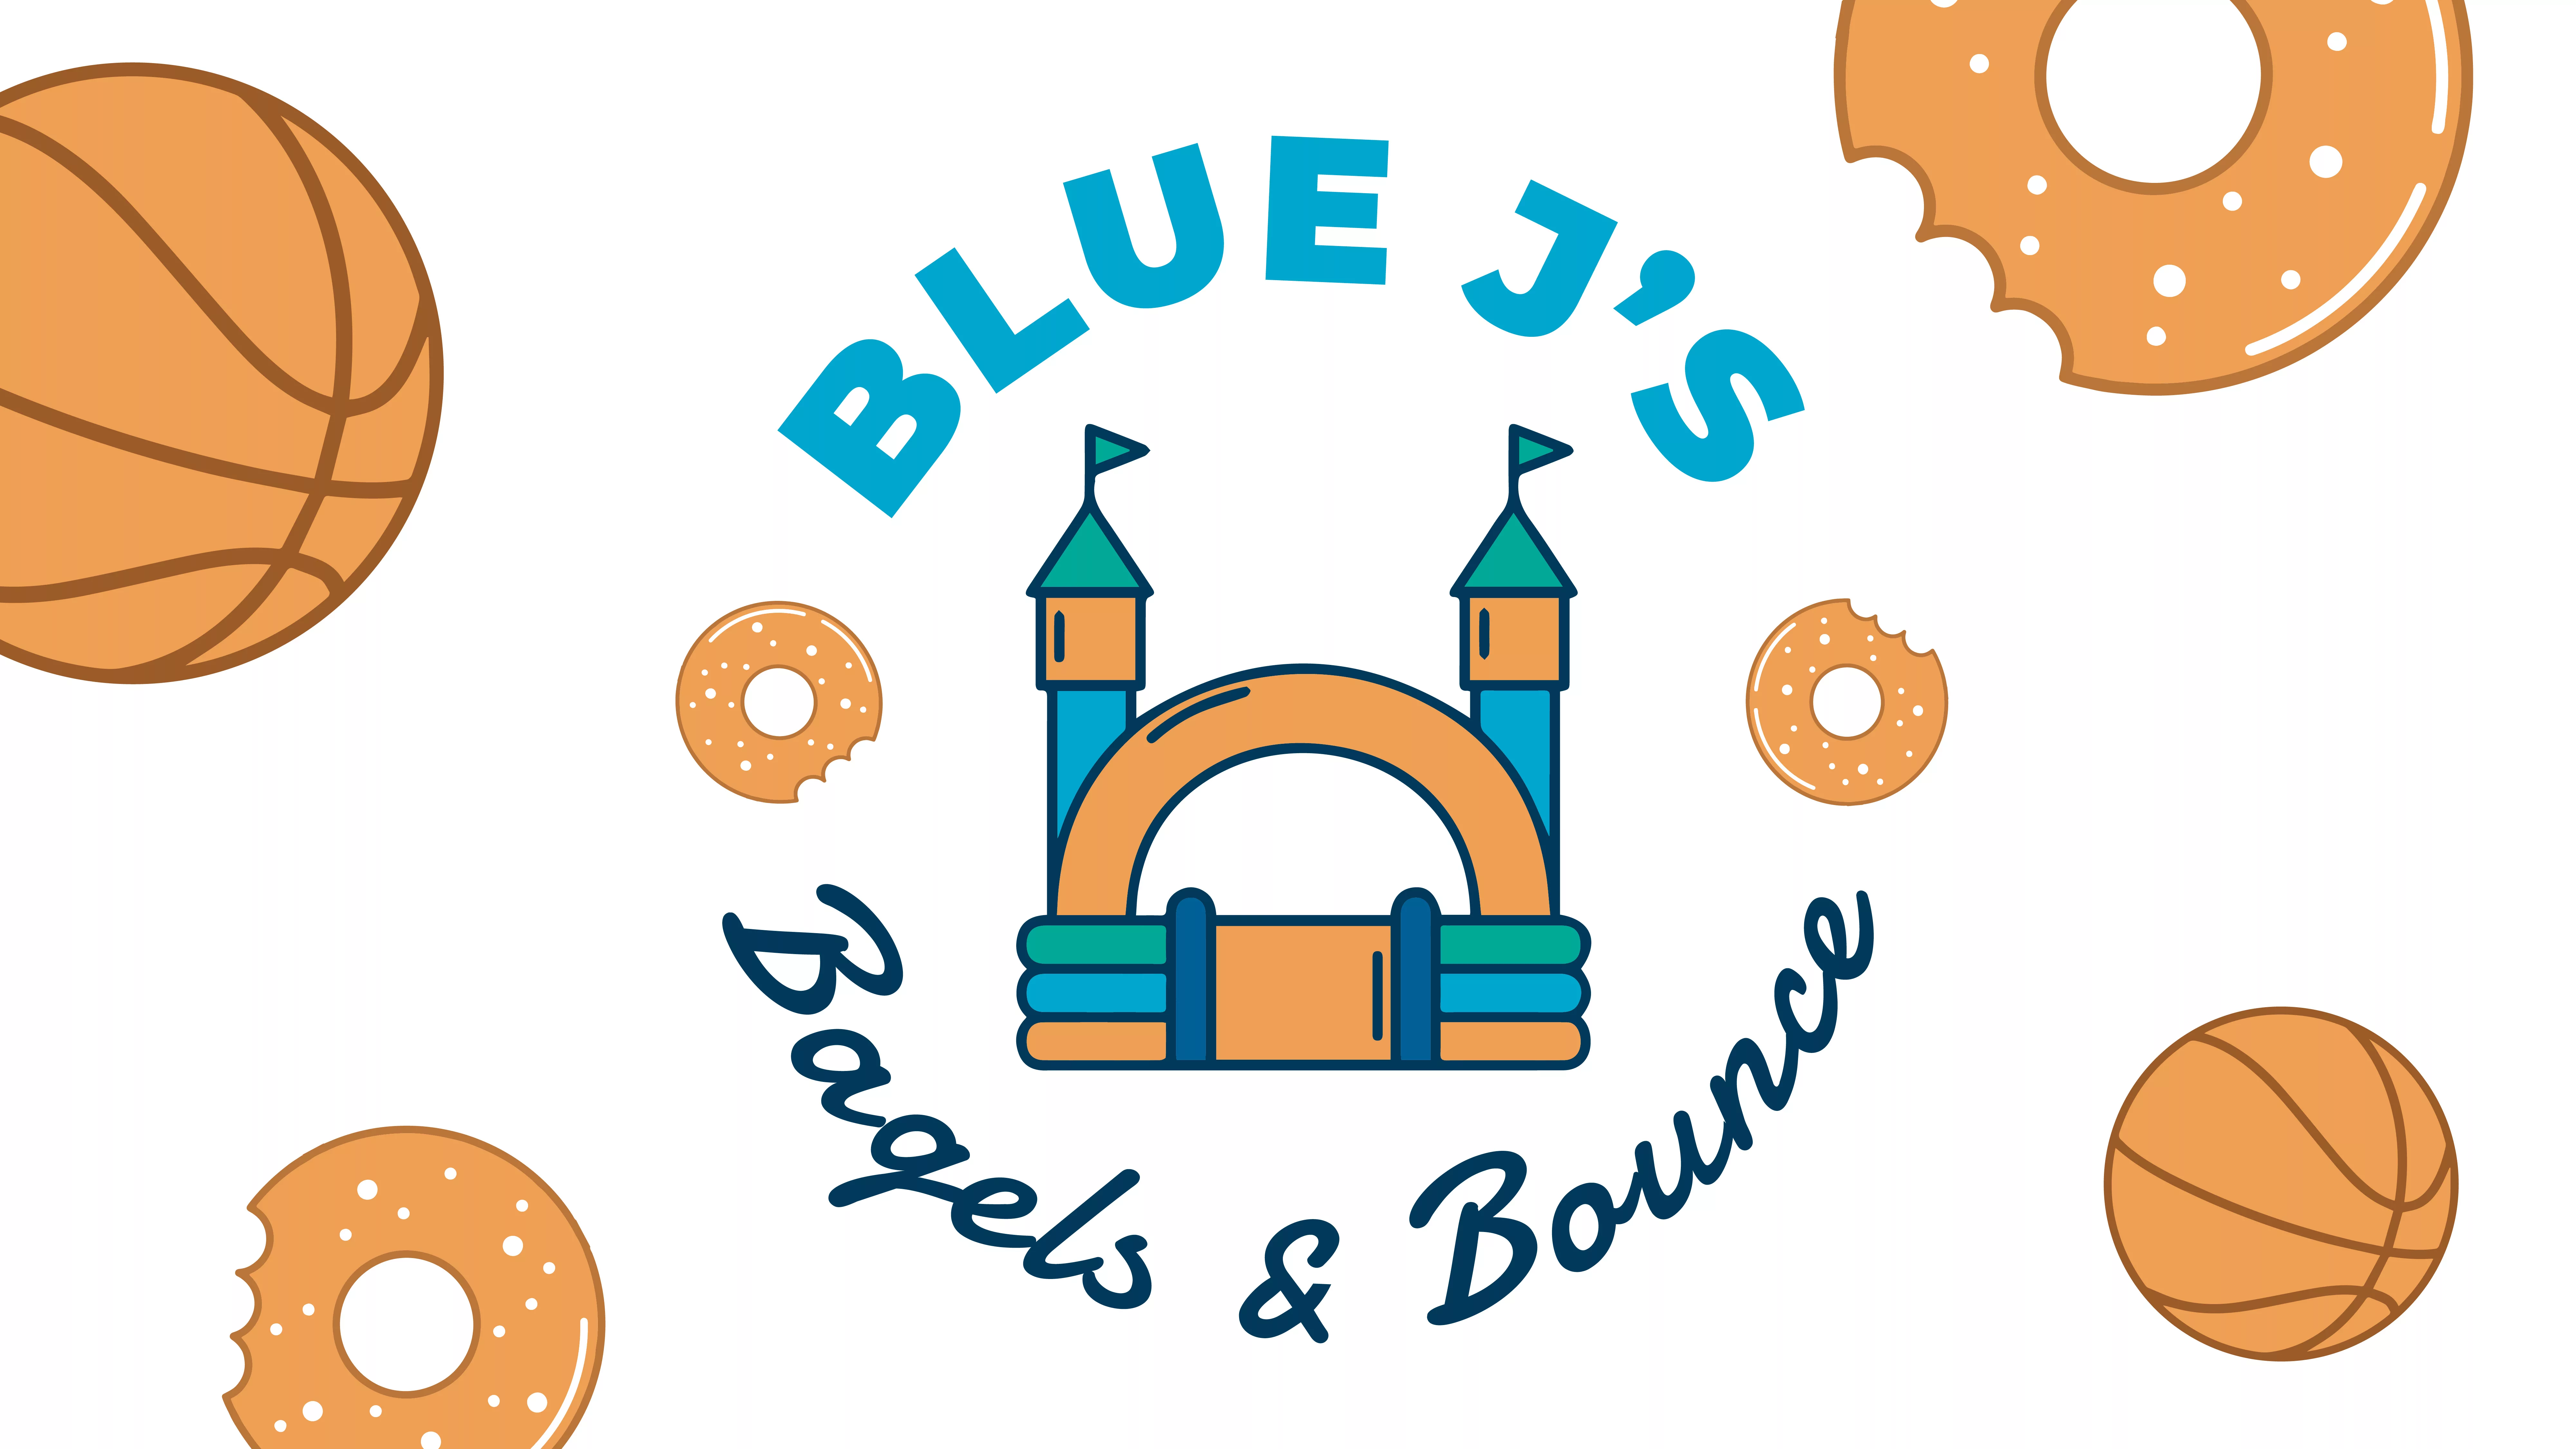 Blue J's Bagels & Bounce Banner, bounce house, basketballs and donuts